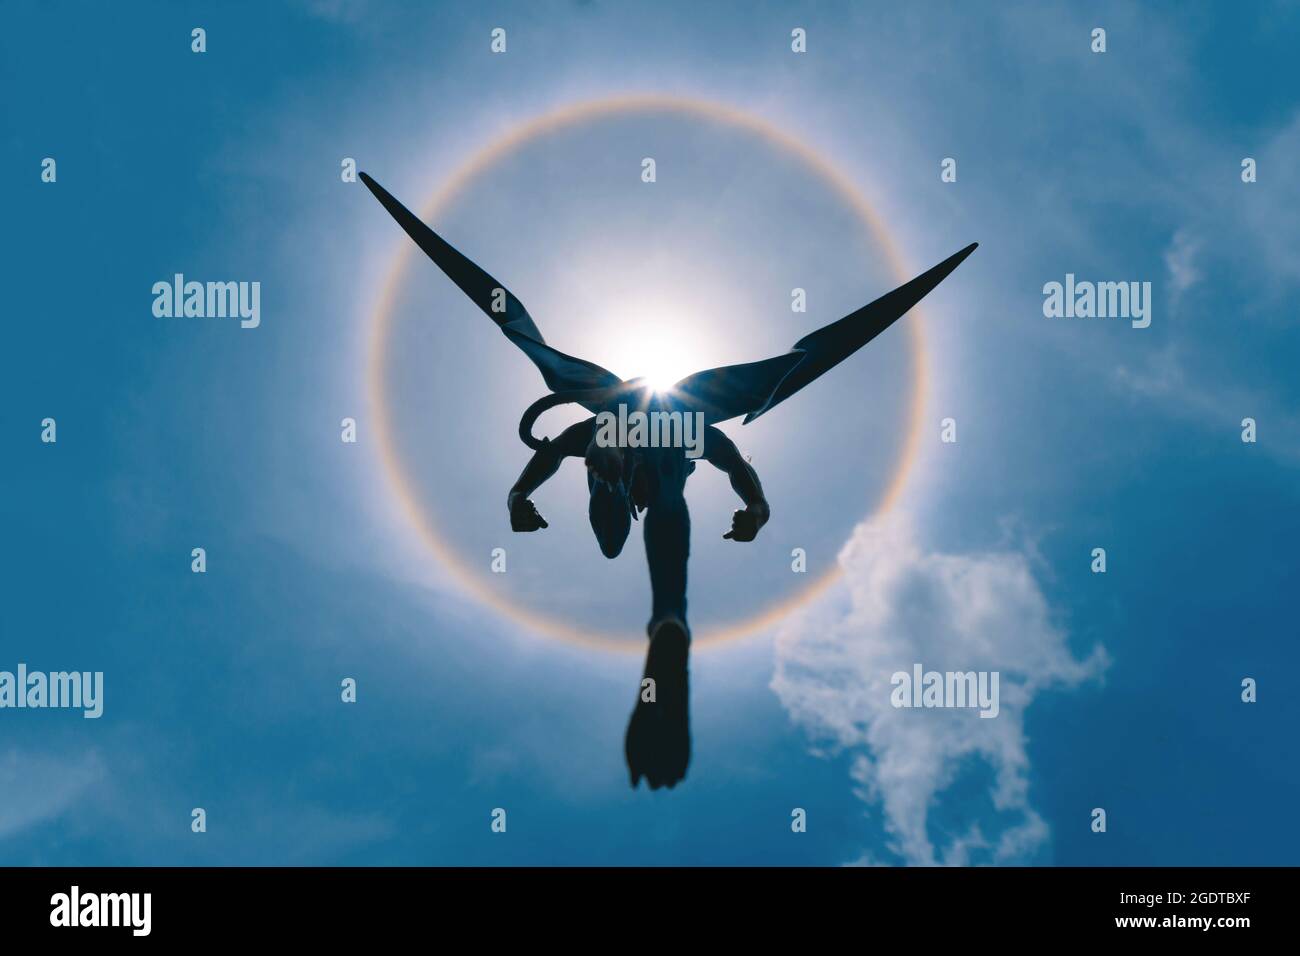 Bangkok, Thailand - August 14, 2021 : Plastic figurine of Devilman from Devilman manga series and animation  with fantastic sun halo. Editorial use on Stock Photo